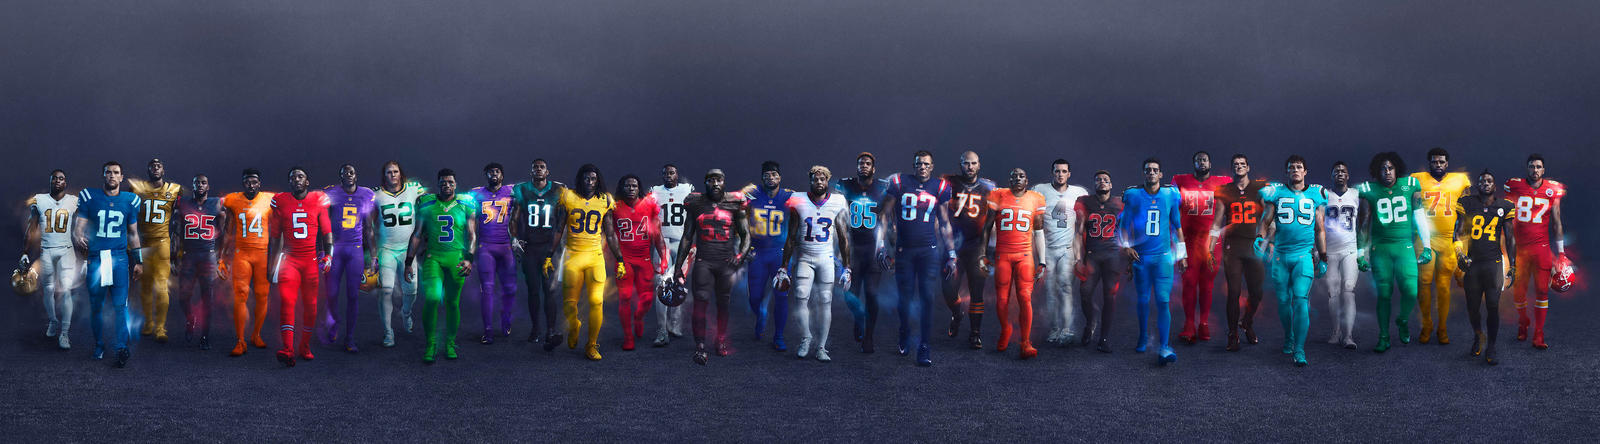 Nike Football NFL Color Rush 2016 Group Wide native 1600